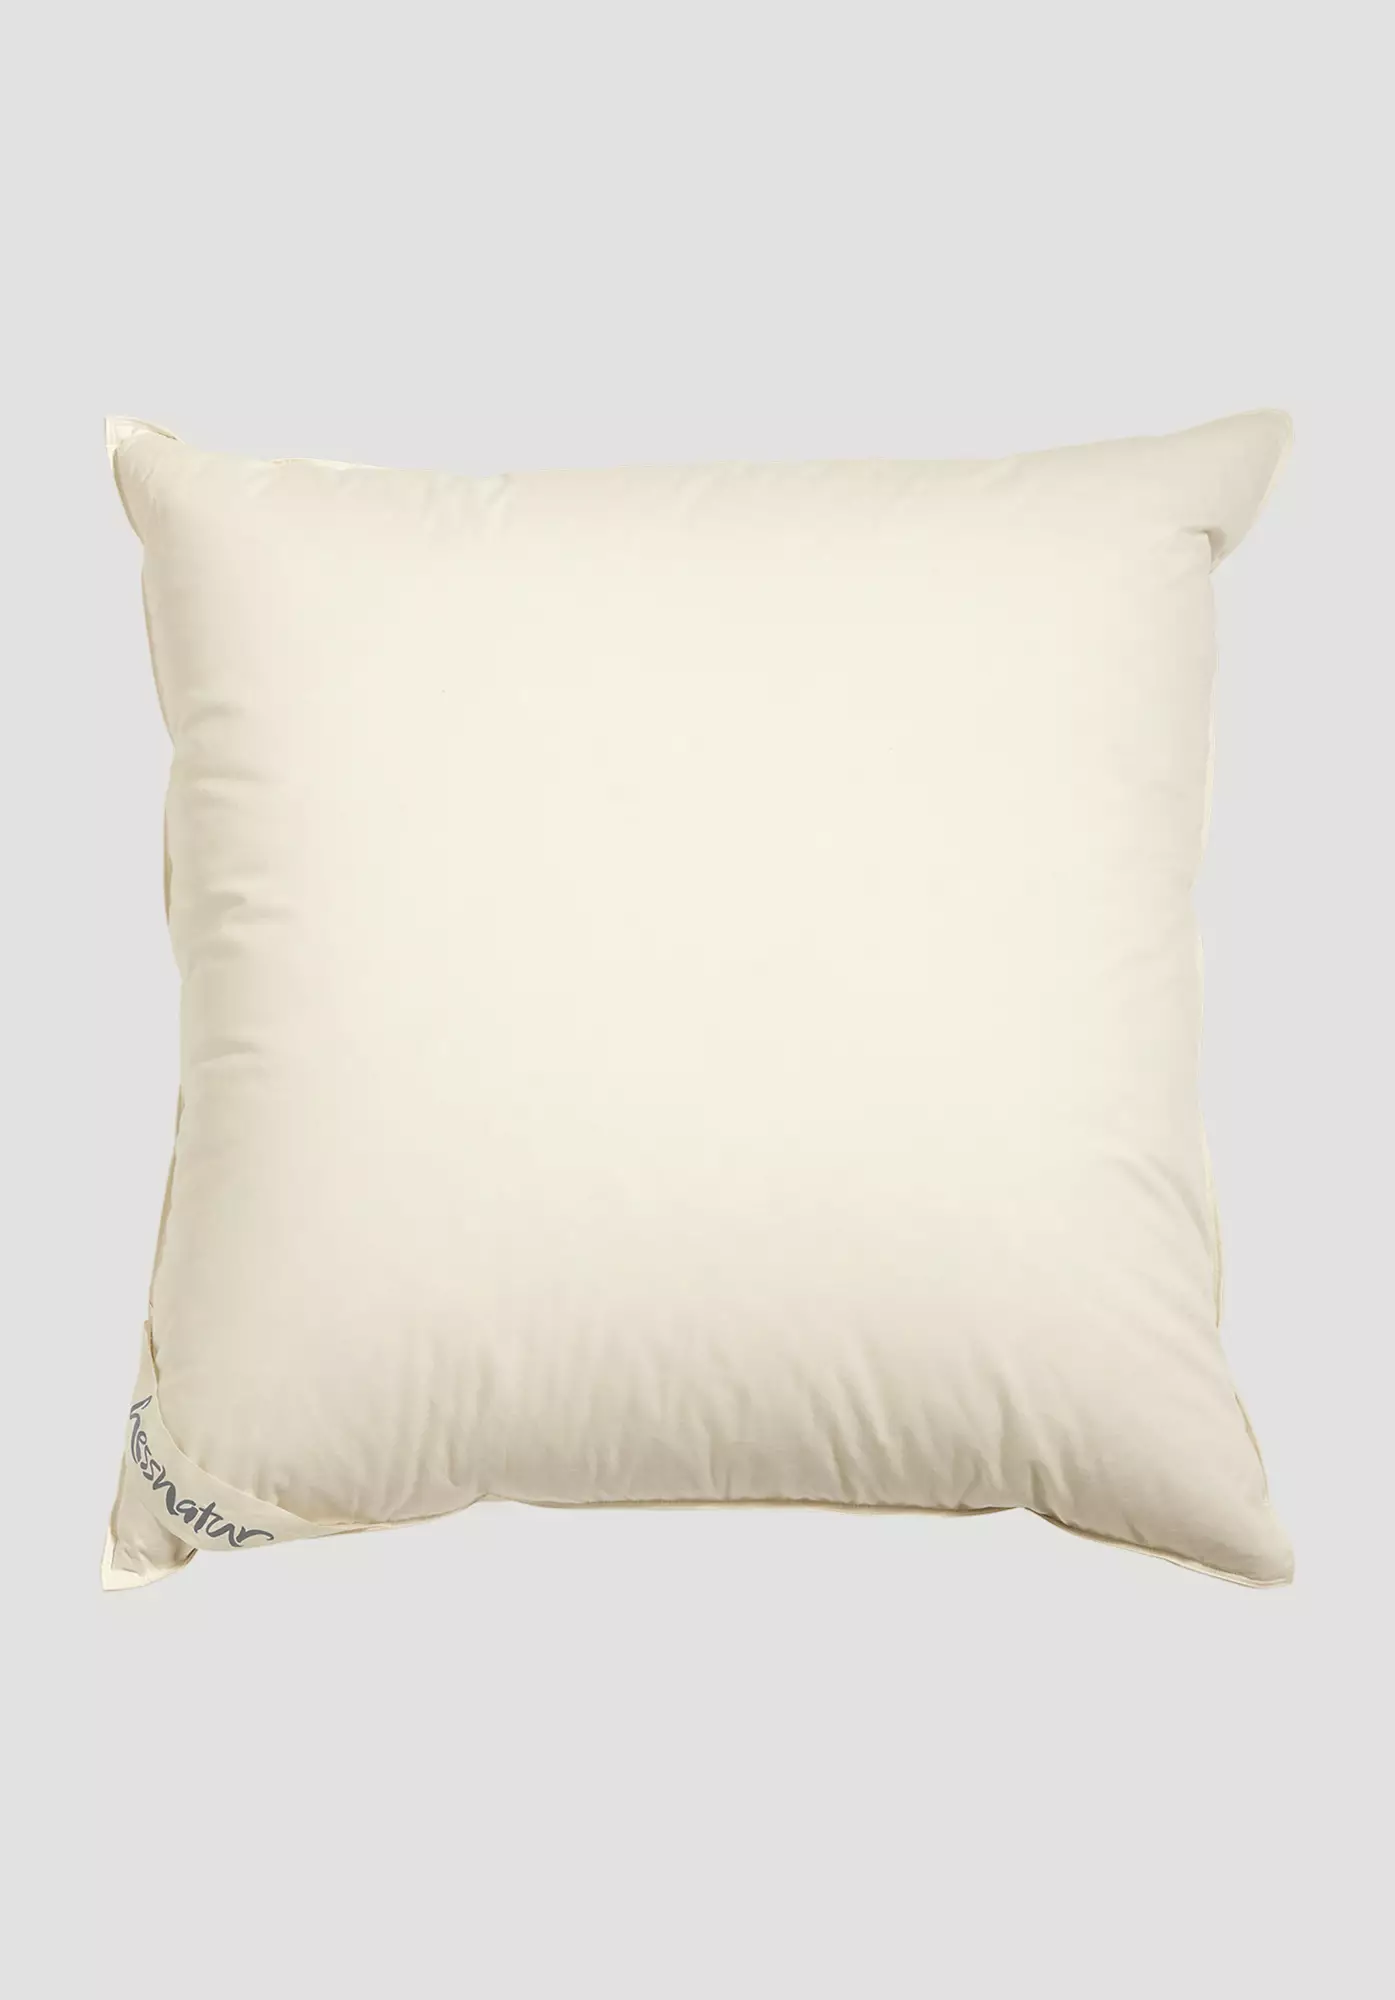 3-chamber pillow with fair down and feathers - 0